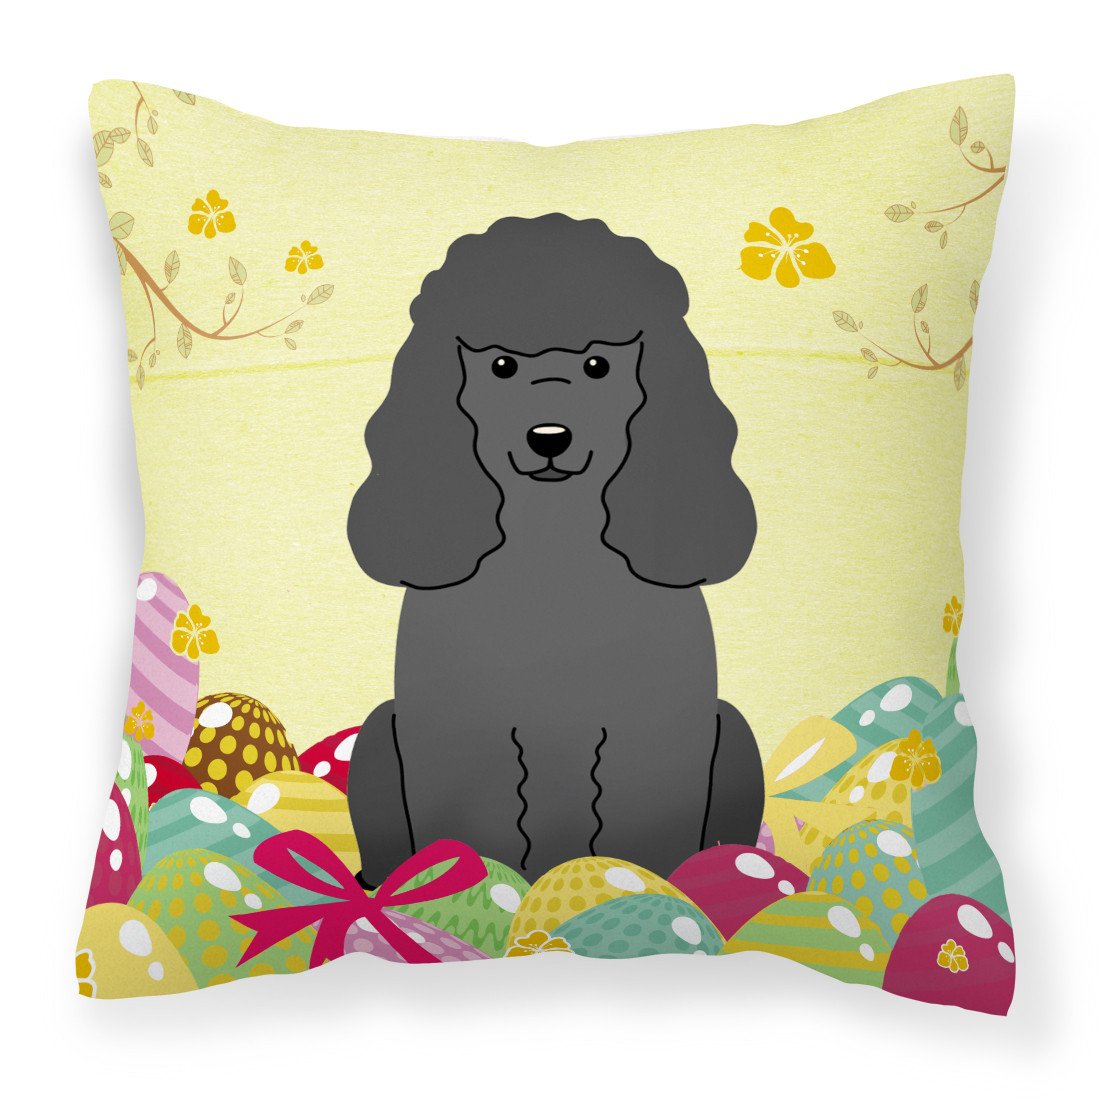 Easter Eggs Poodle Black Fabric Decorative Pillow BB6071PW1818 by Caroline's Treasures